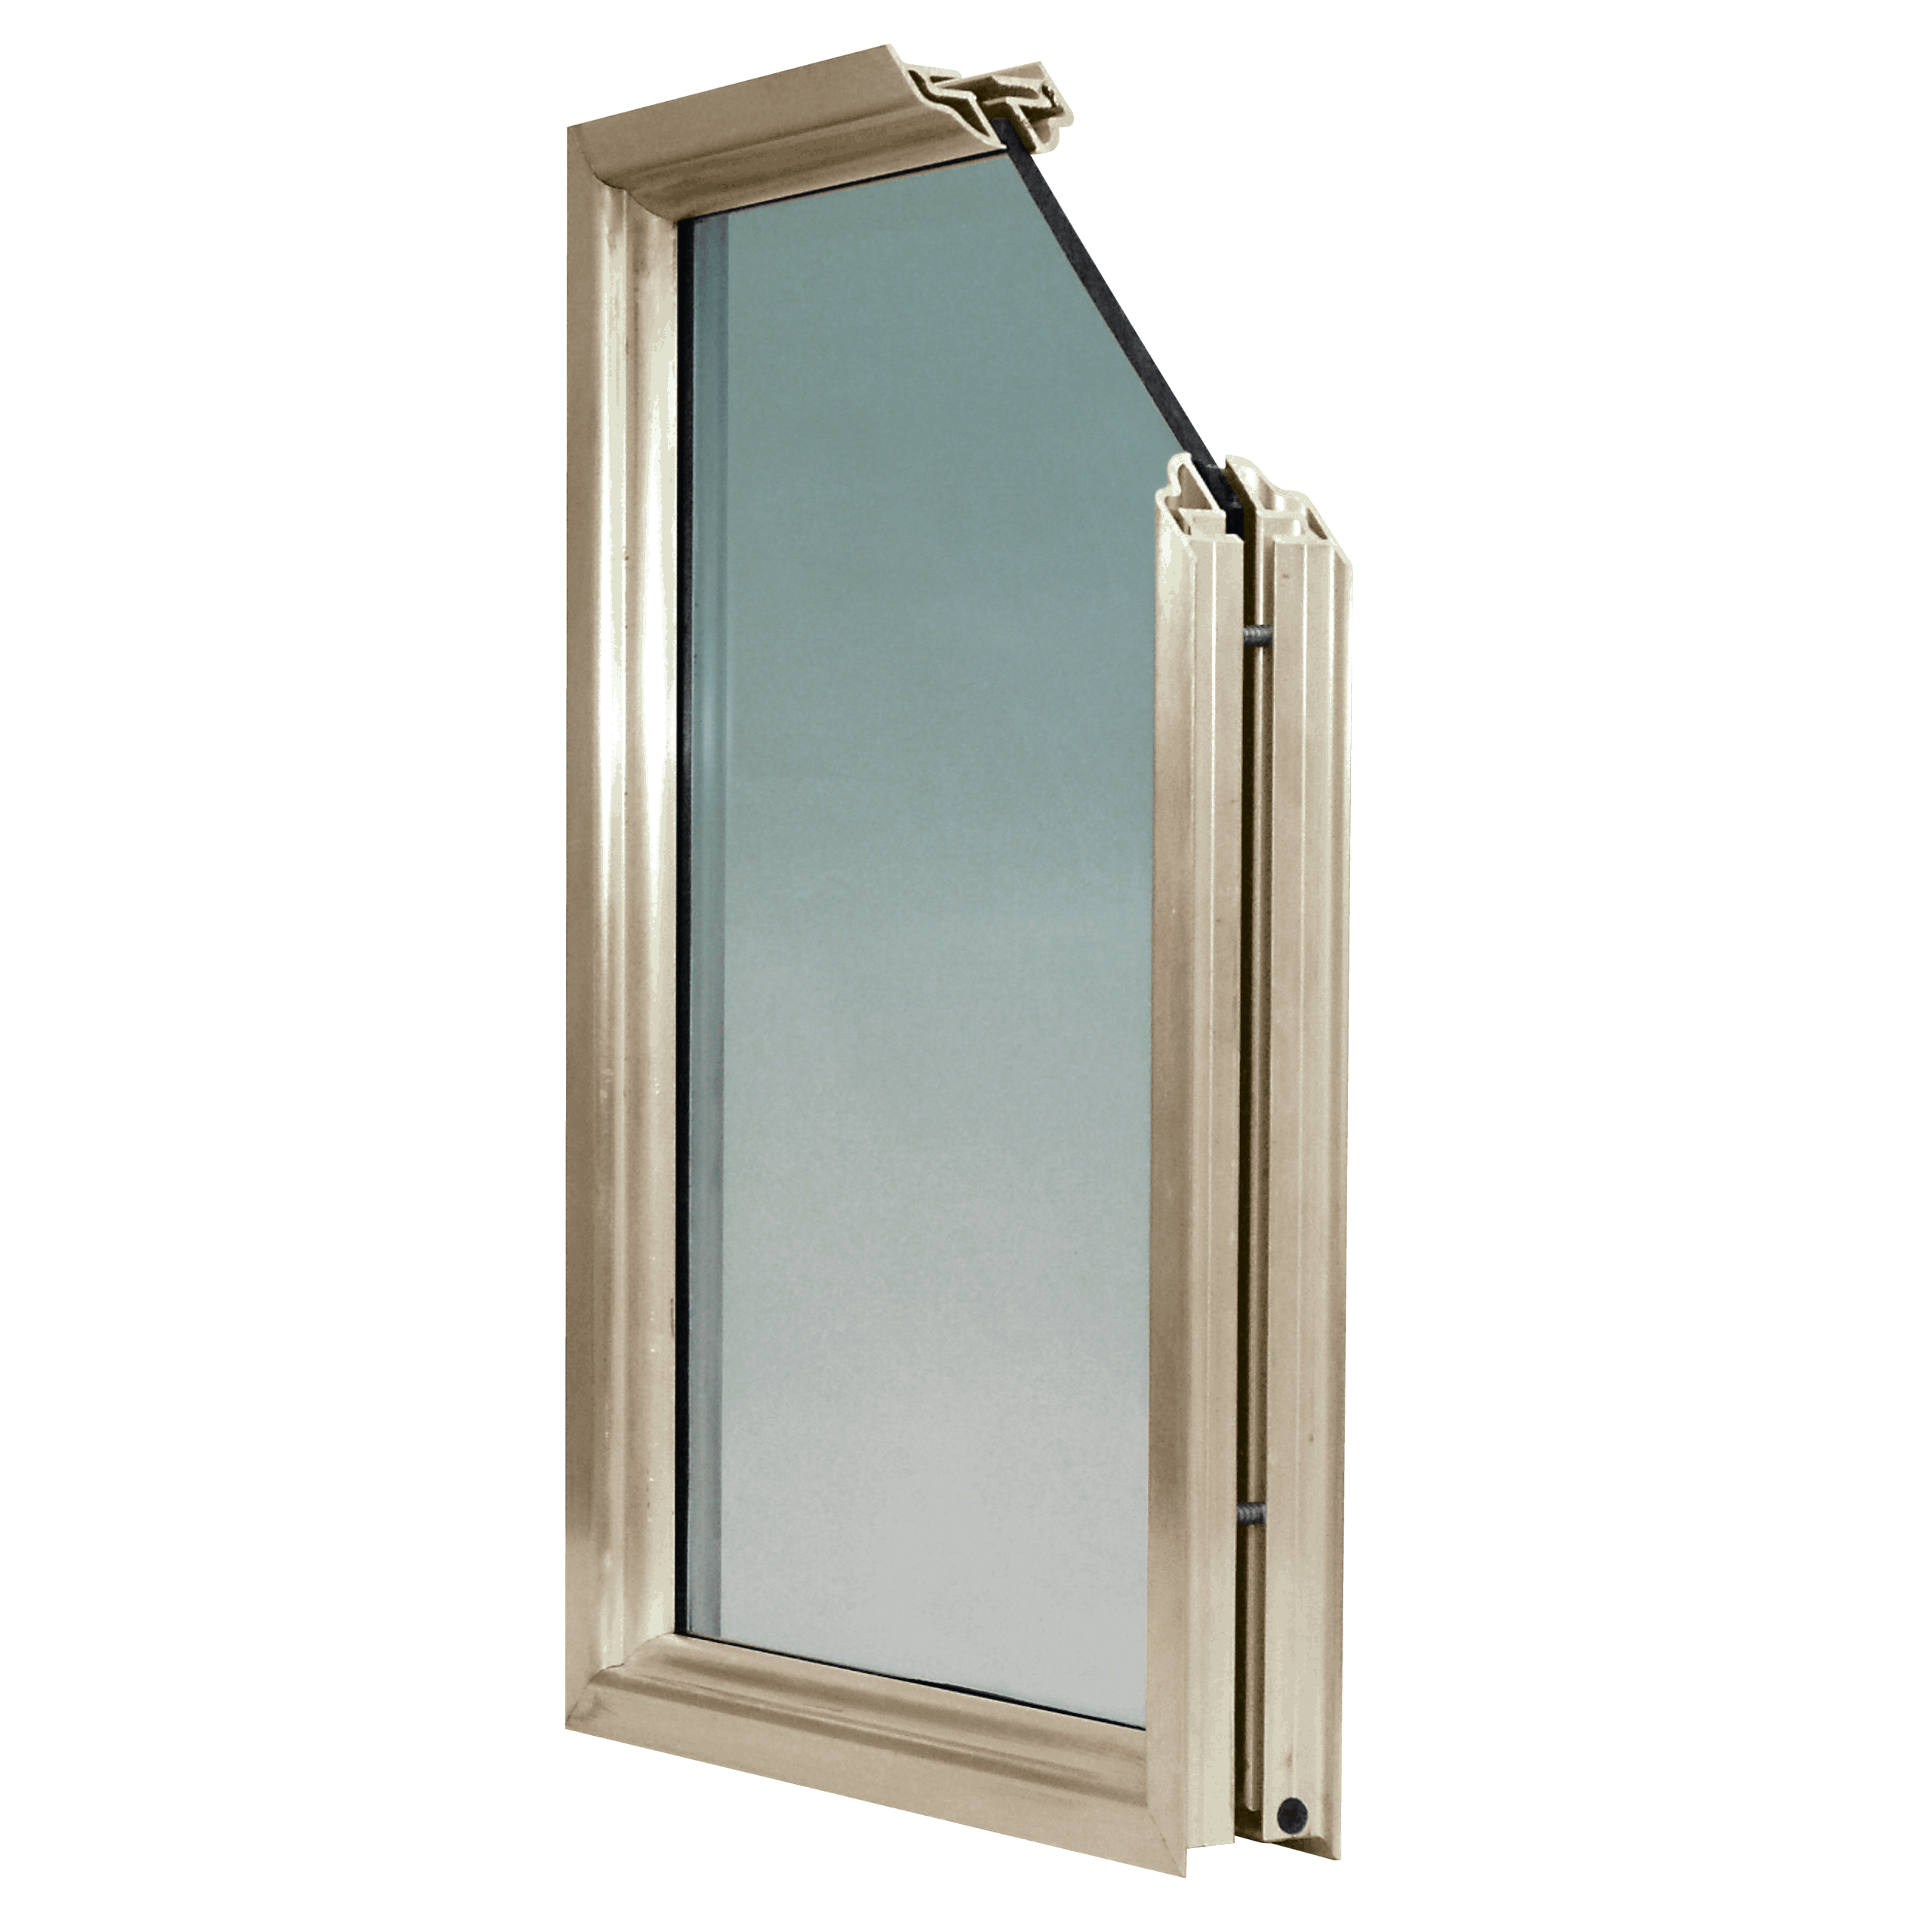 An aluminum window with a glass panel.